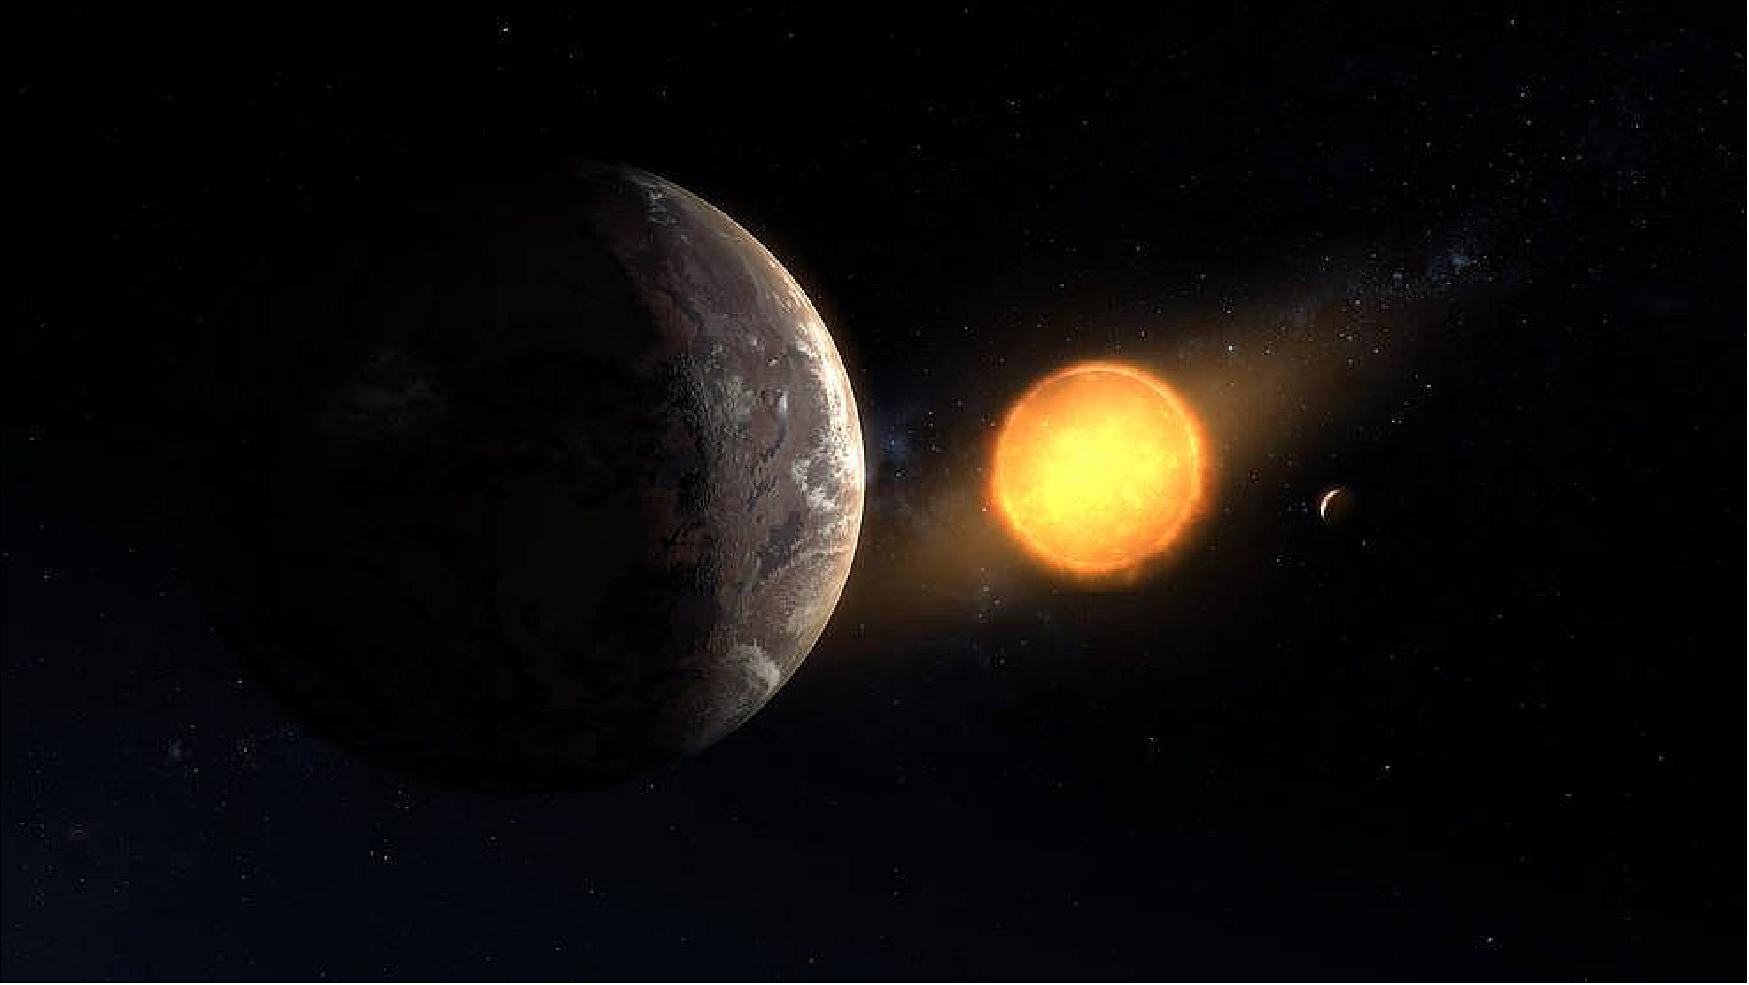 Figure 22: An illustration of Kepler-1649c orbiting around its host red dwarf star. This newly discovered exoplanet is in its star’s habitable zone and is the closest to Earth in size and temperature found yet in Kepler's data (image credit: NASA/Ames Research Center/Daniel Rutter)